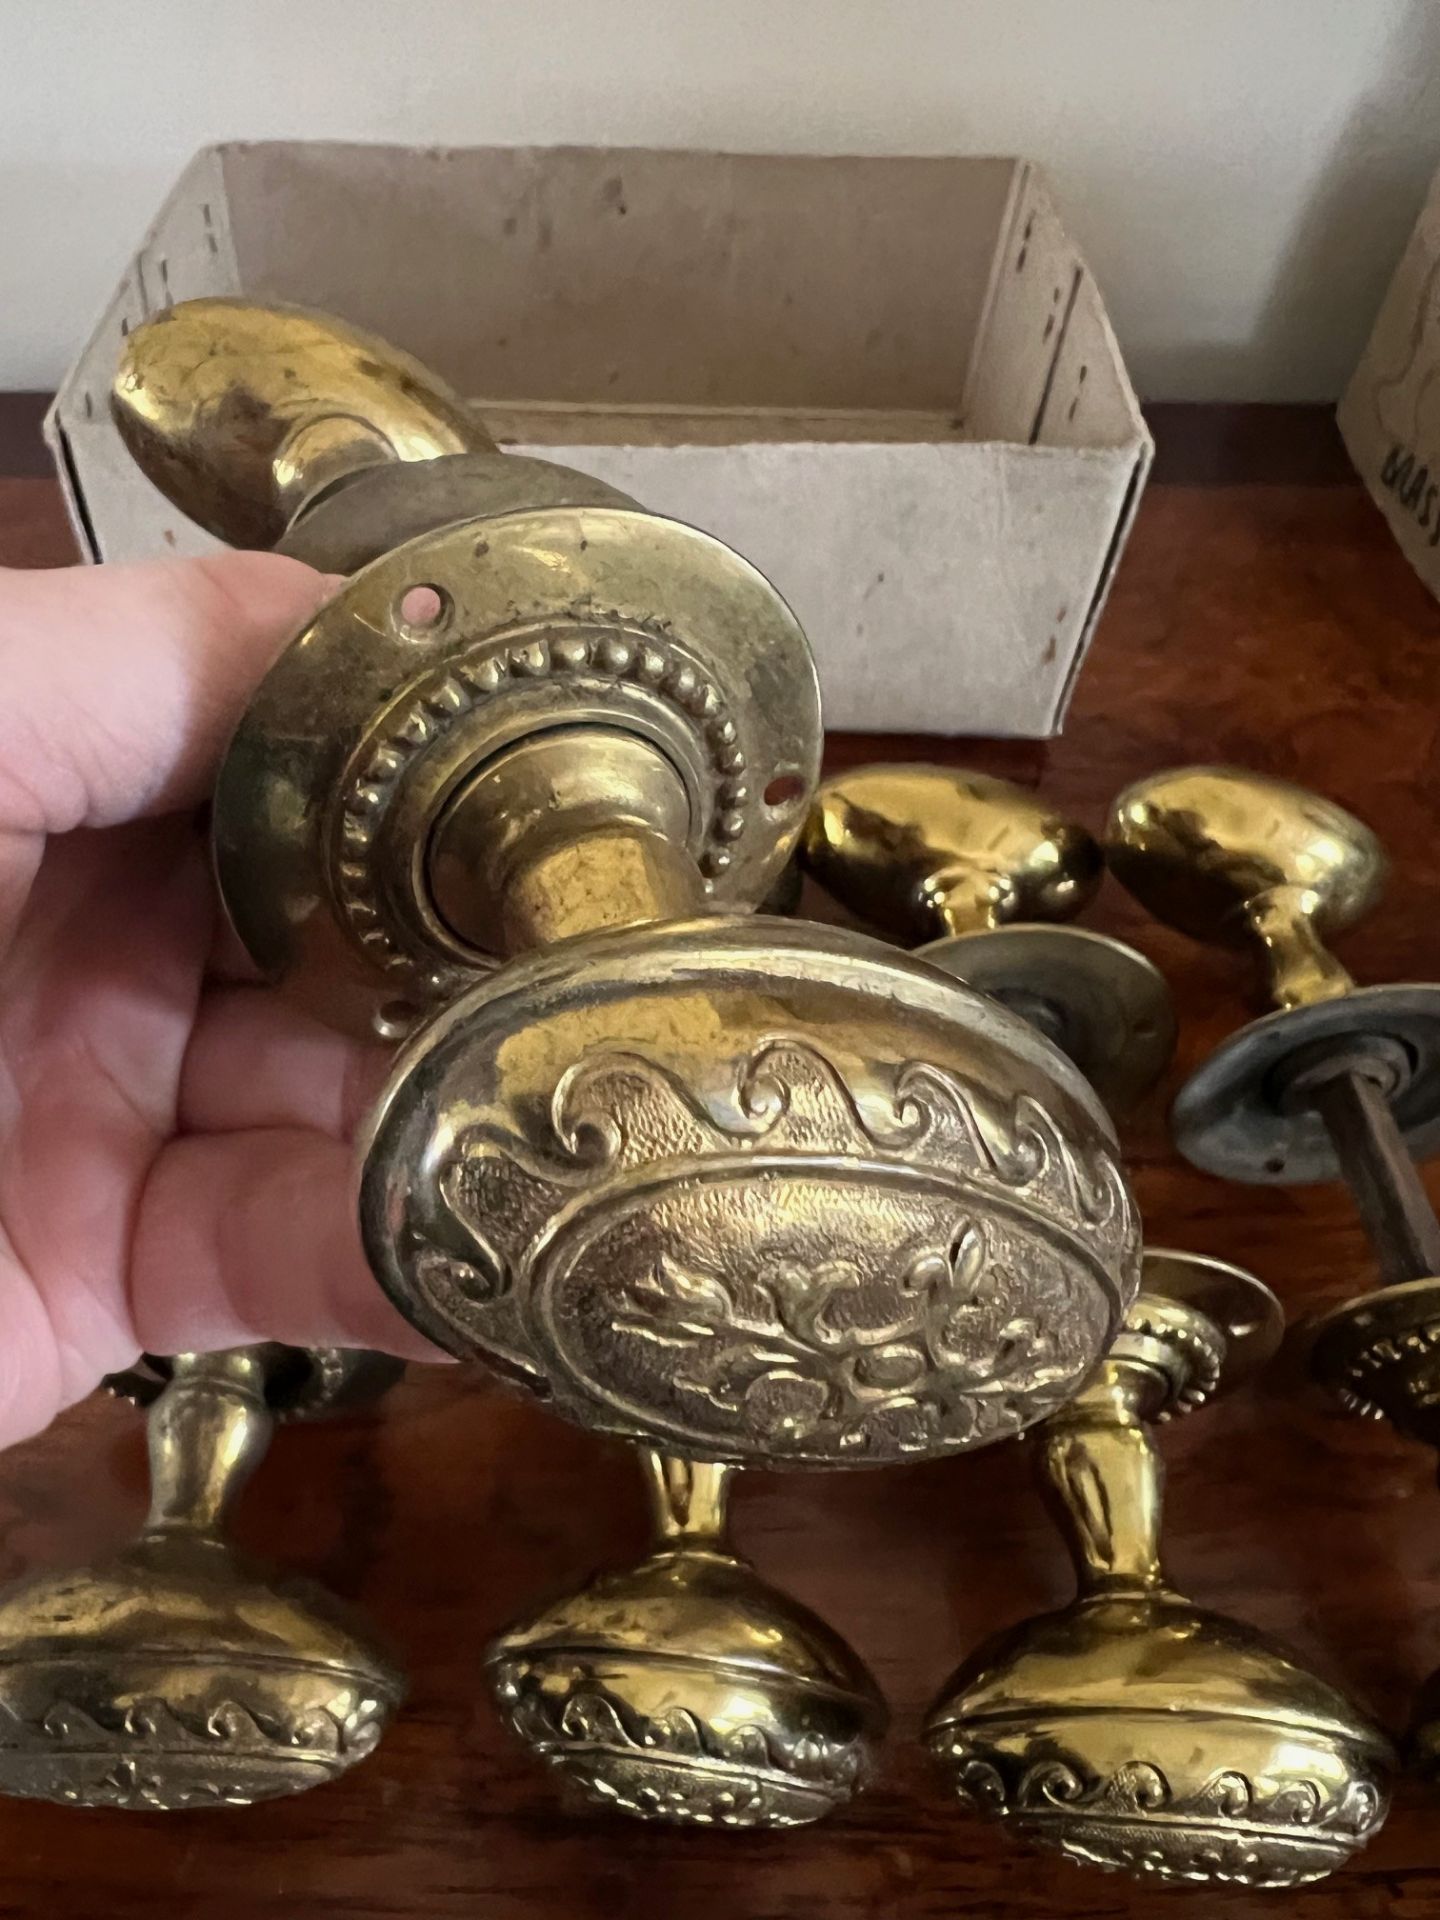 FIVE PAIRS OF UNUSED ORNATE SOLID BRASS DOOR KNOBS, OLD SHOP STOCK, CIRCA 1950s, PLUS OLD SCREWS - Image 3 of 6